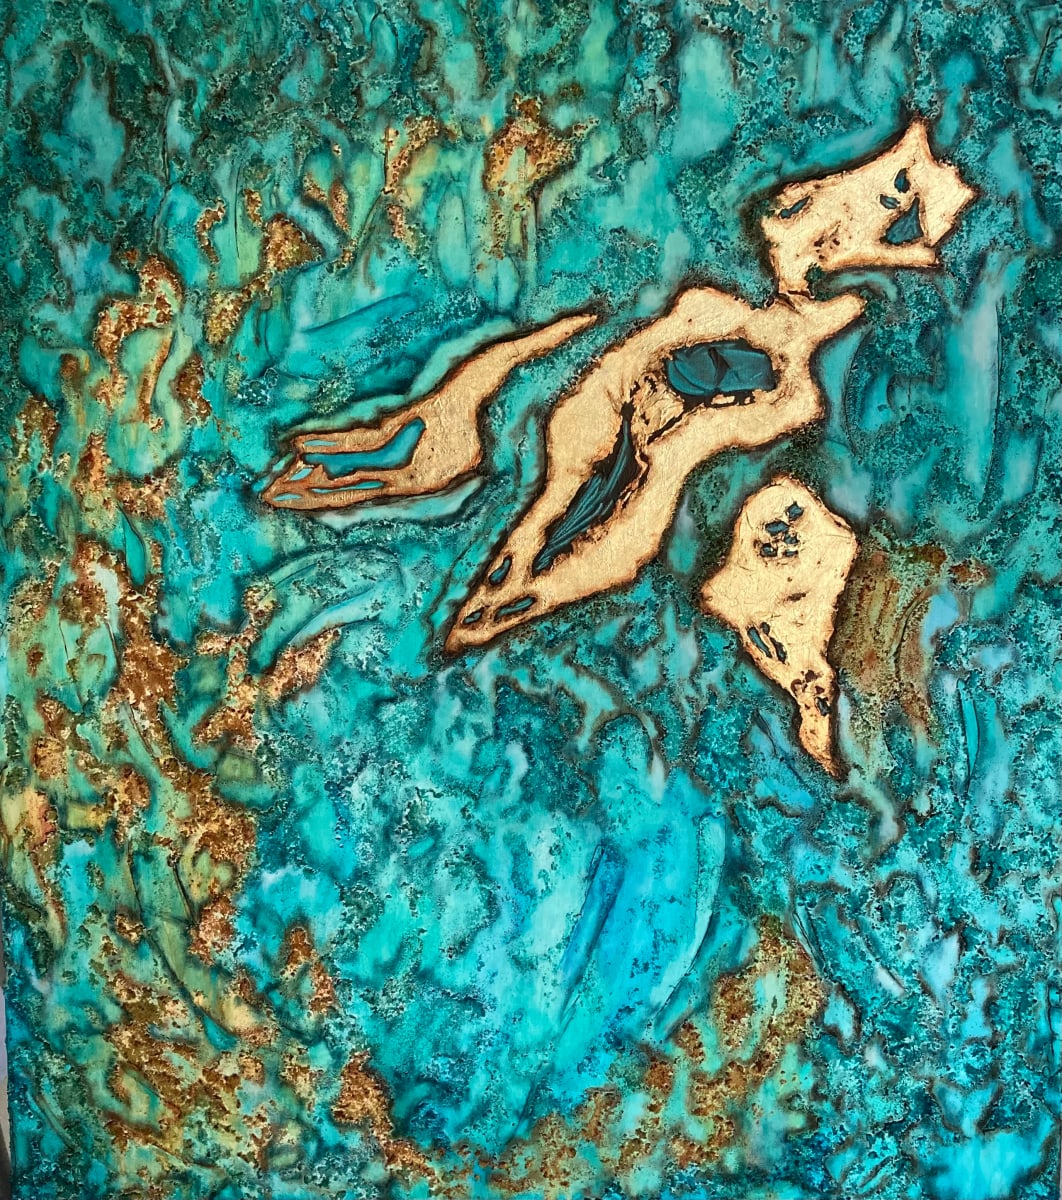 'Reef Dream' - Commissioned Painting by Jude Scott  Image: Commission Piece -Abstract with an aerial perspective inspired by the beautiful turquoise waters and stunning reefs in Australia. The client gave me full artistic license to create this piece after seeing a smaller rendition which they loved but wanted to go bigger.
